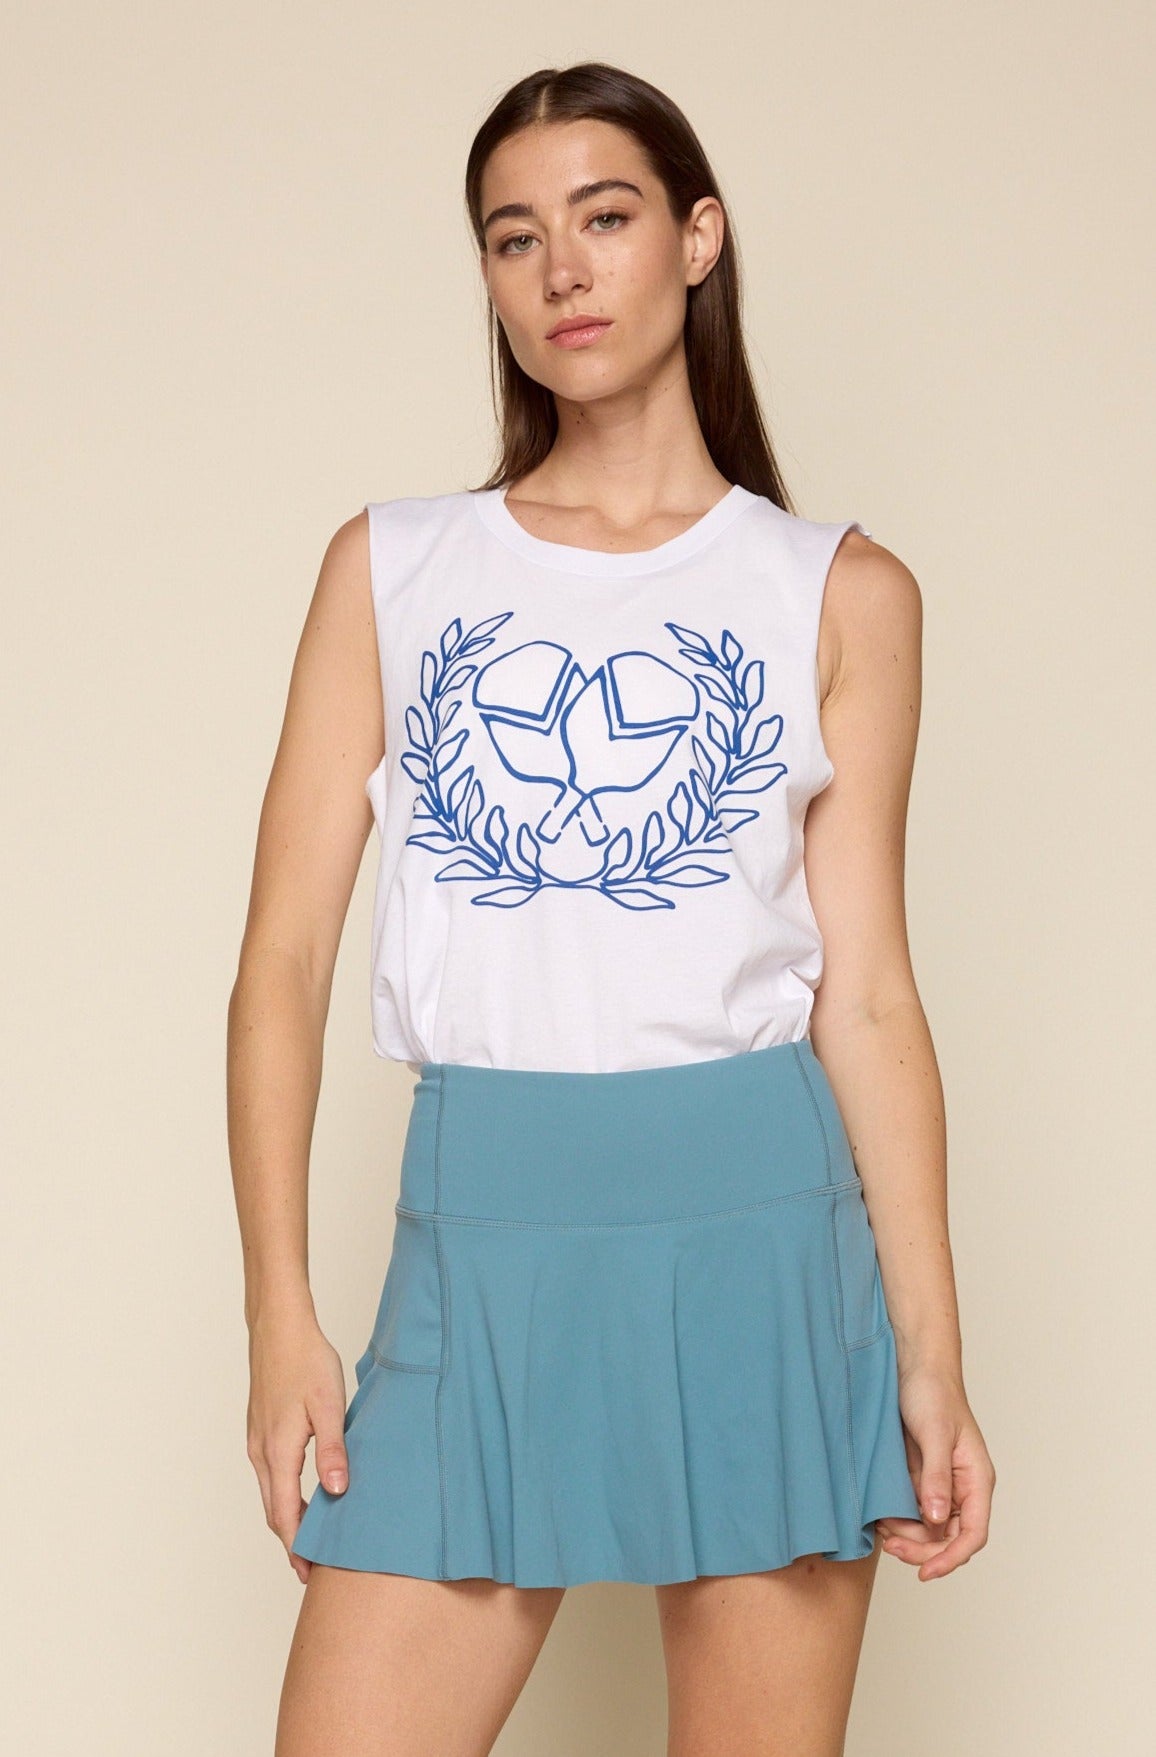 Cropped frontal photo of female model wearing a white muscle tank. Print on the muscle is criss cross pickle ball paddles in blue font surrounded by victory wreath. Model is also wearing a pleated blue skirt 